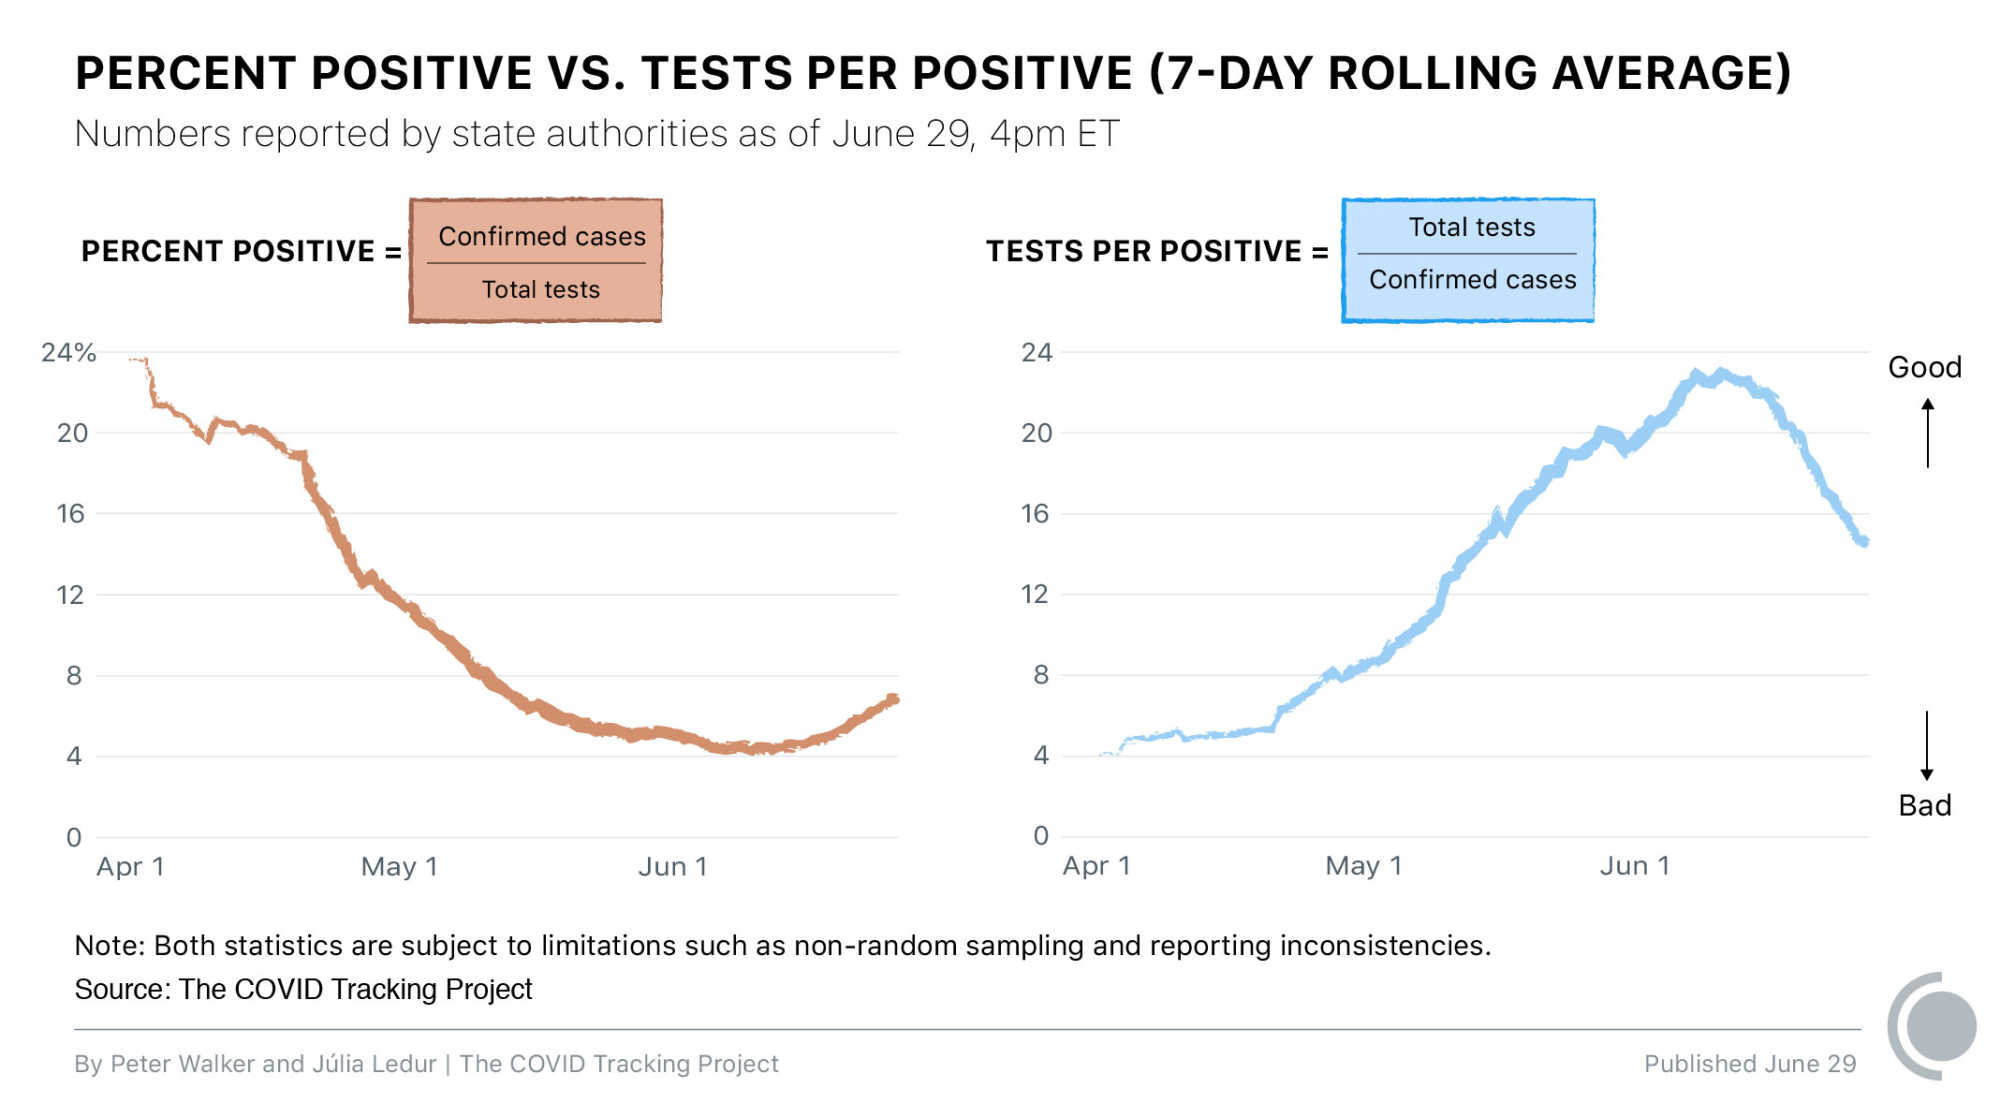 Charts showing a falling and then rising percent positive curve and a rising and then falling tests per positive curve